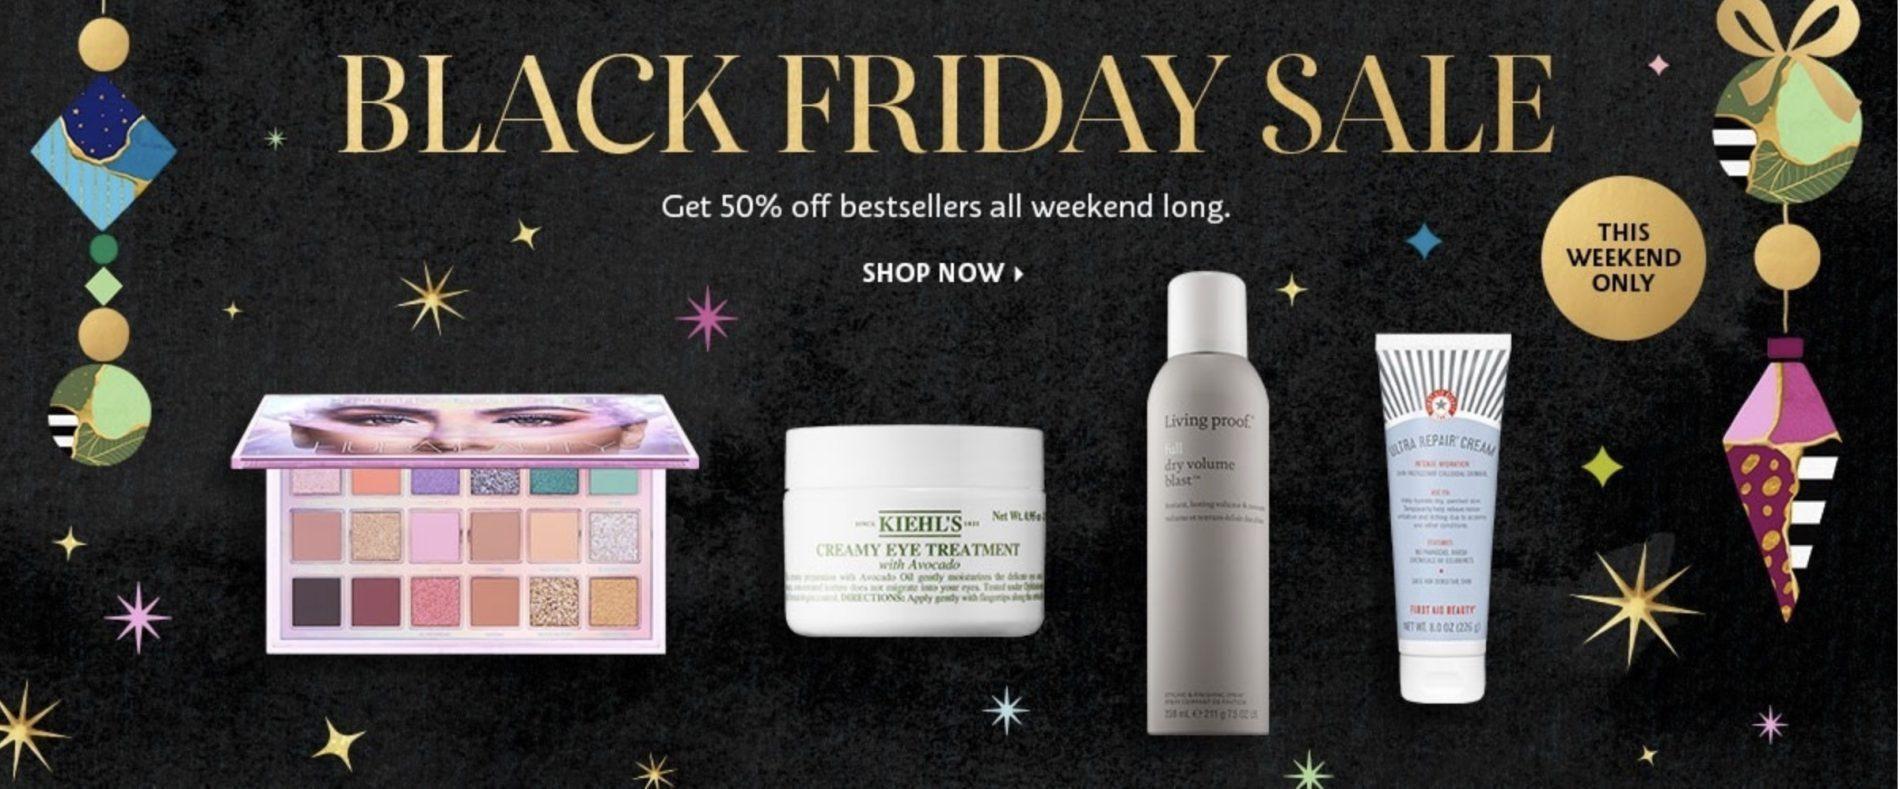 Sephora Black Friday Sale – Save Up to 50% Off Select Favorites